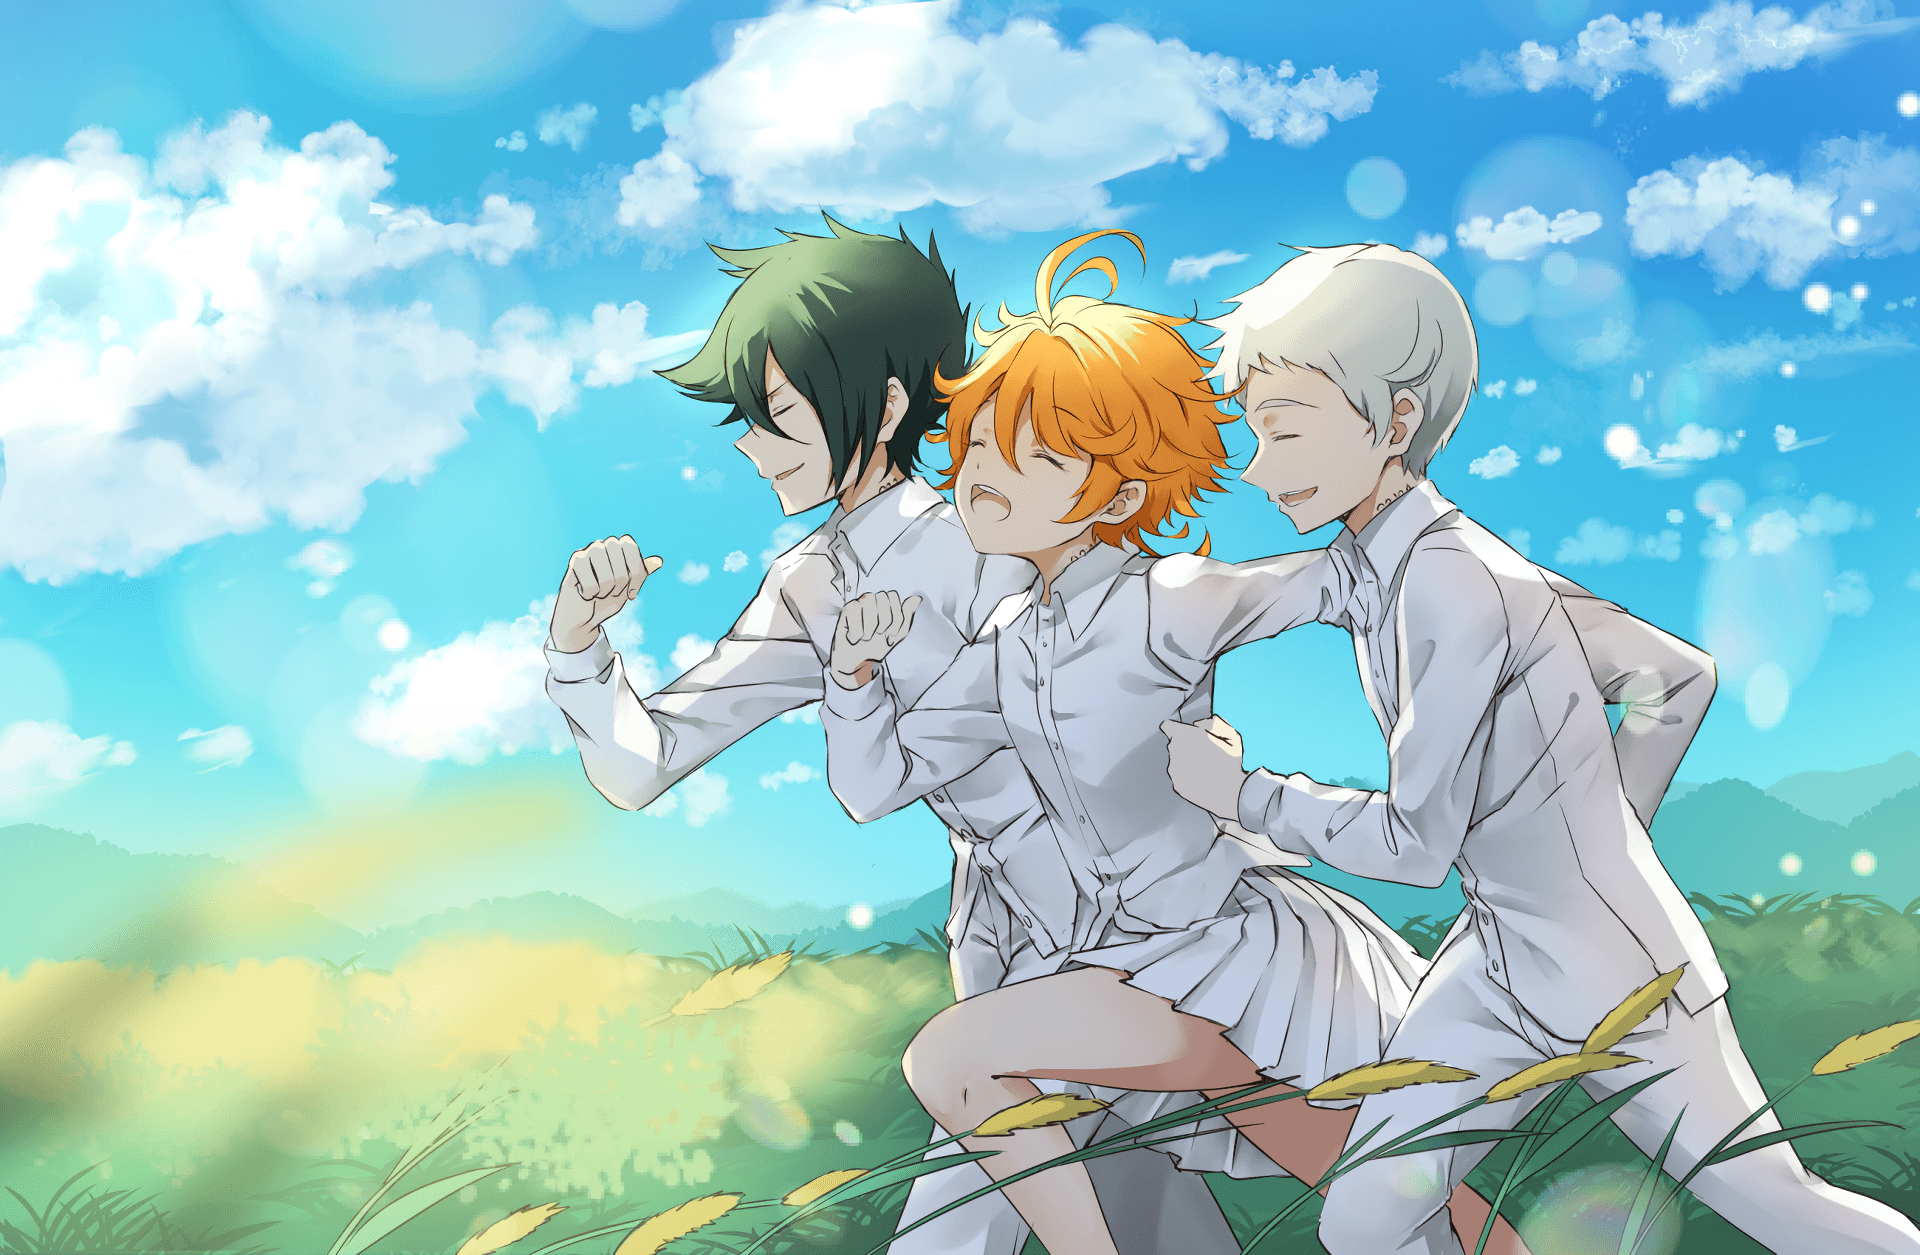 Emma The Promised Neverland Wallpaper. HD Background